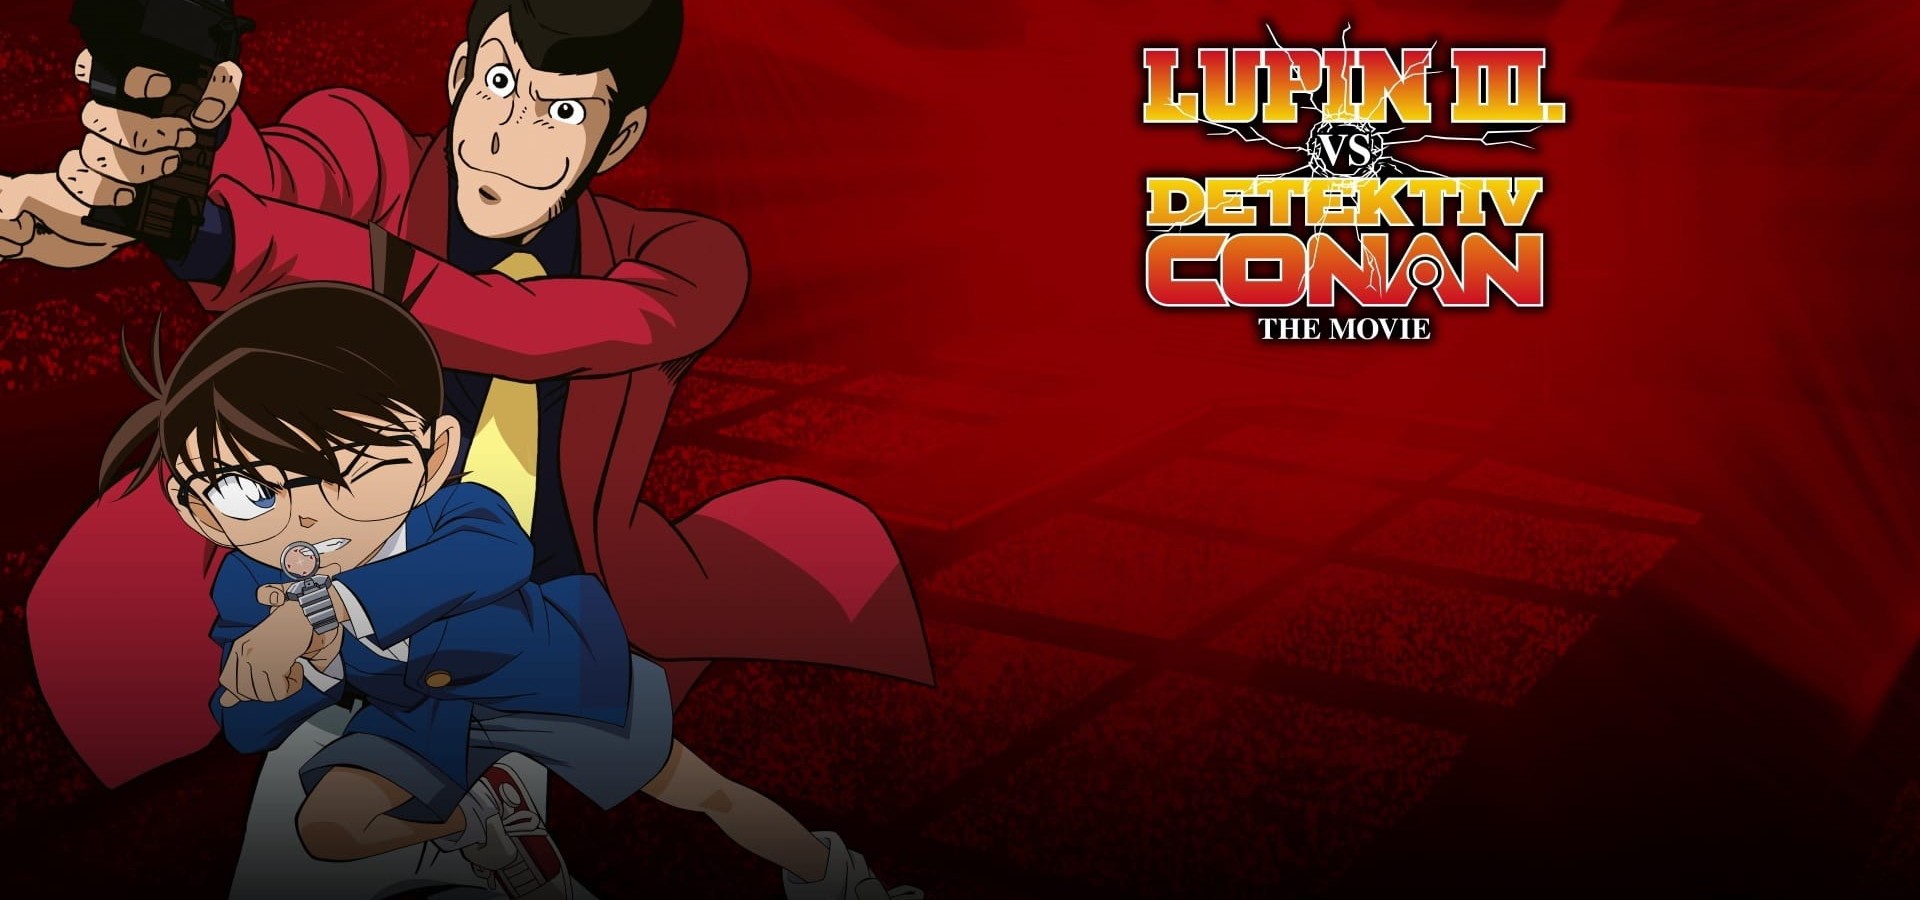 Streaming Lupin The Third Vs Detective Conan The Movie 2013 Full Movies Online